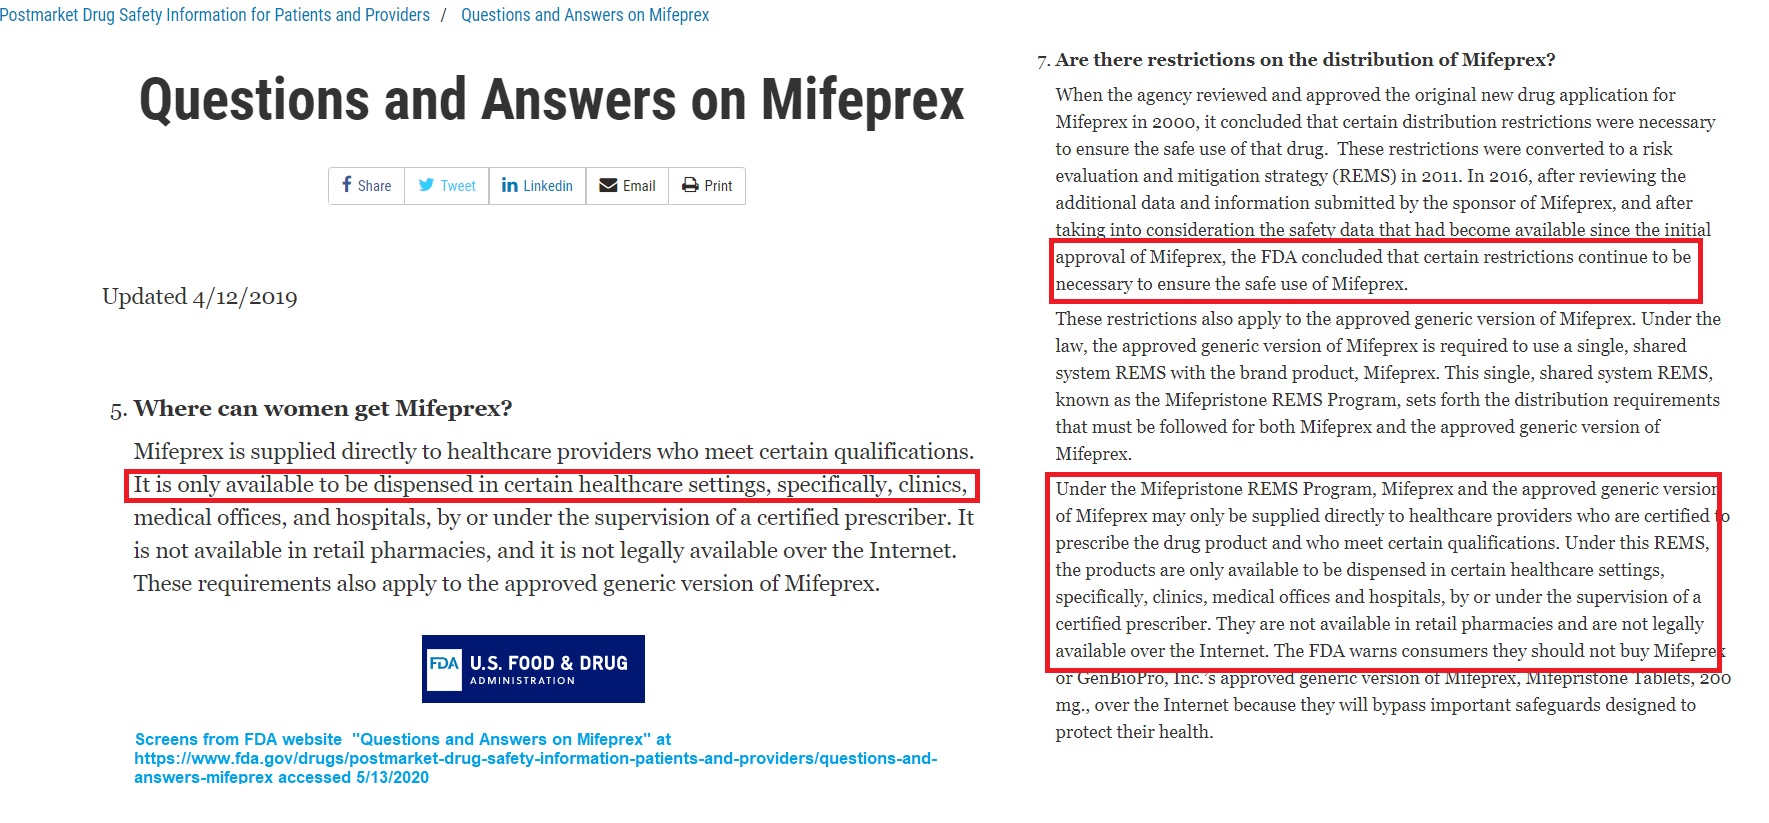 Image: FDA website shows abortion pills can only be dispensed in a clinic or HC facility